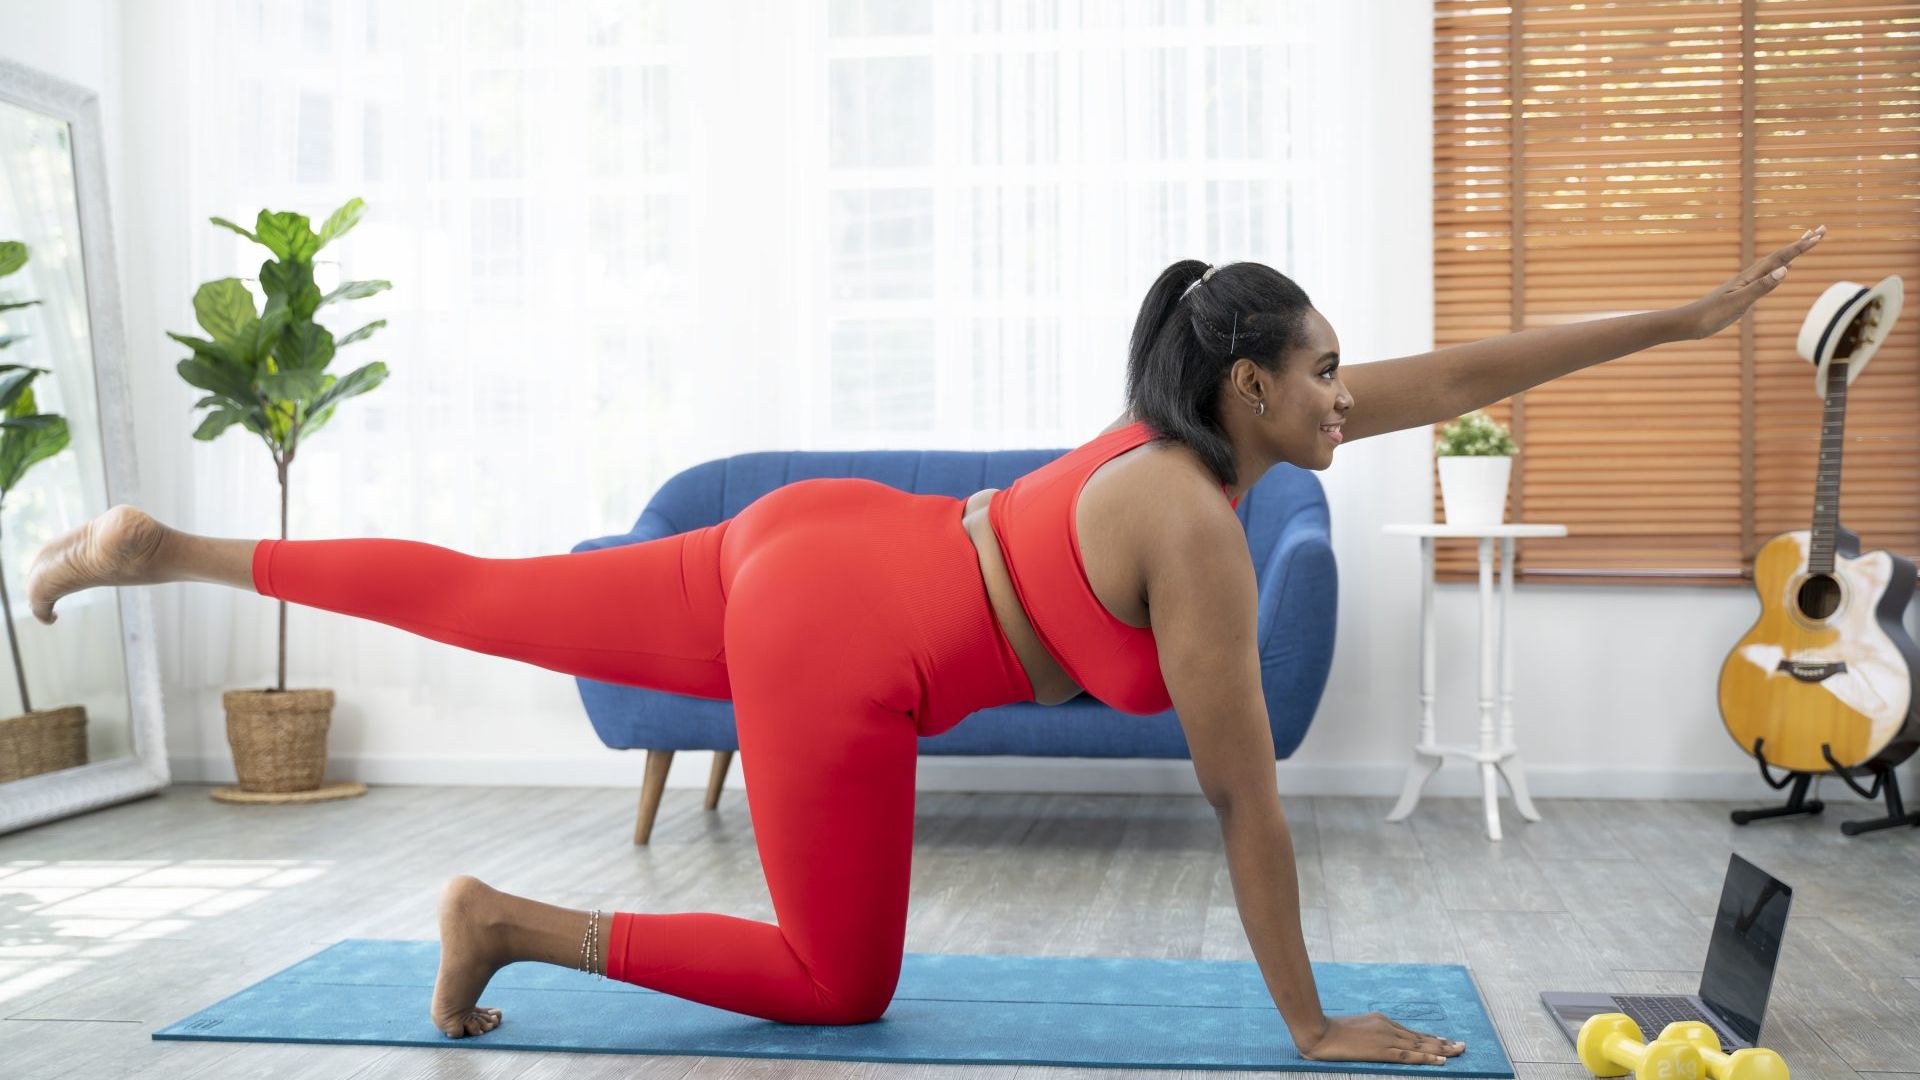 try this quickie pilates abs series to fire up your core! 🥵🔥 8 reps , pilates